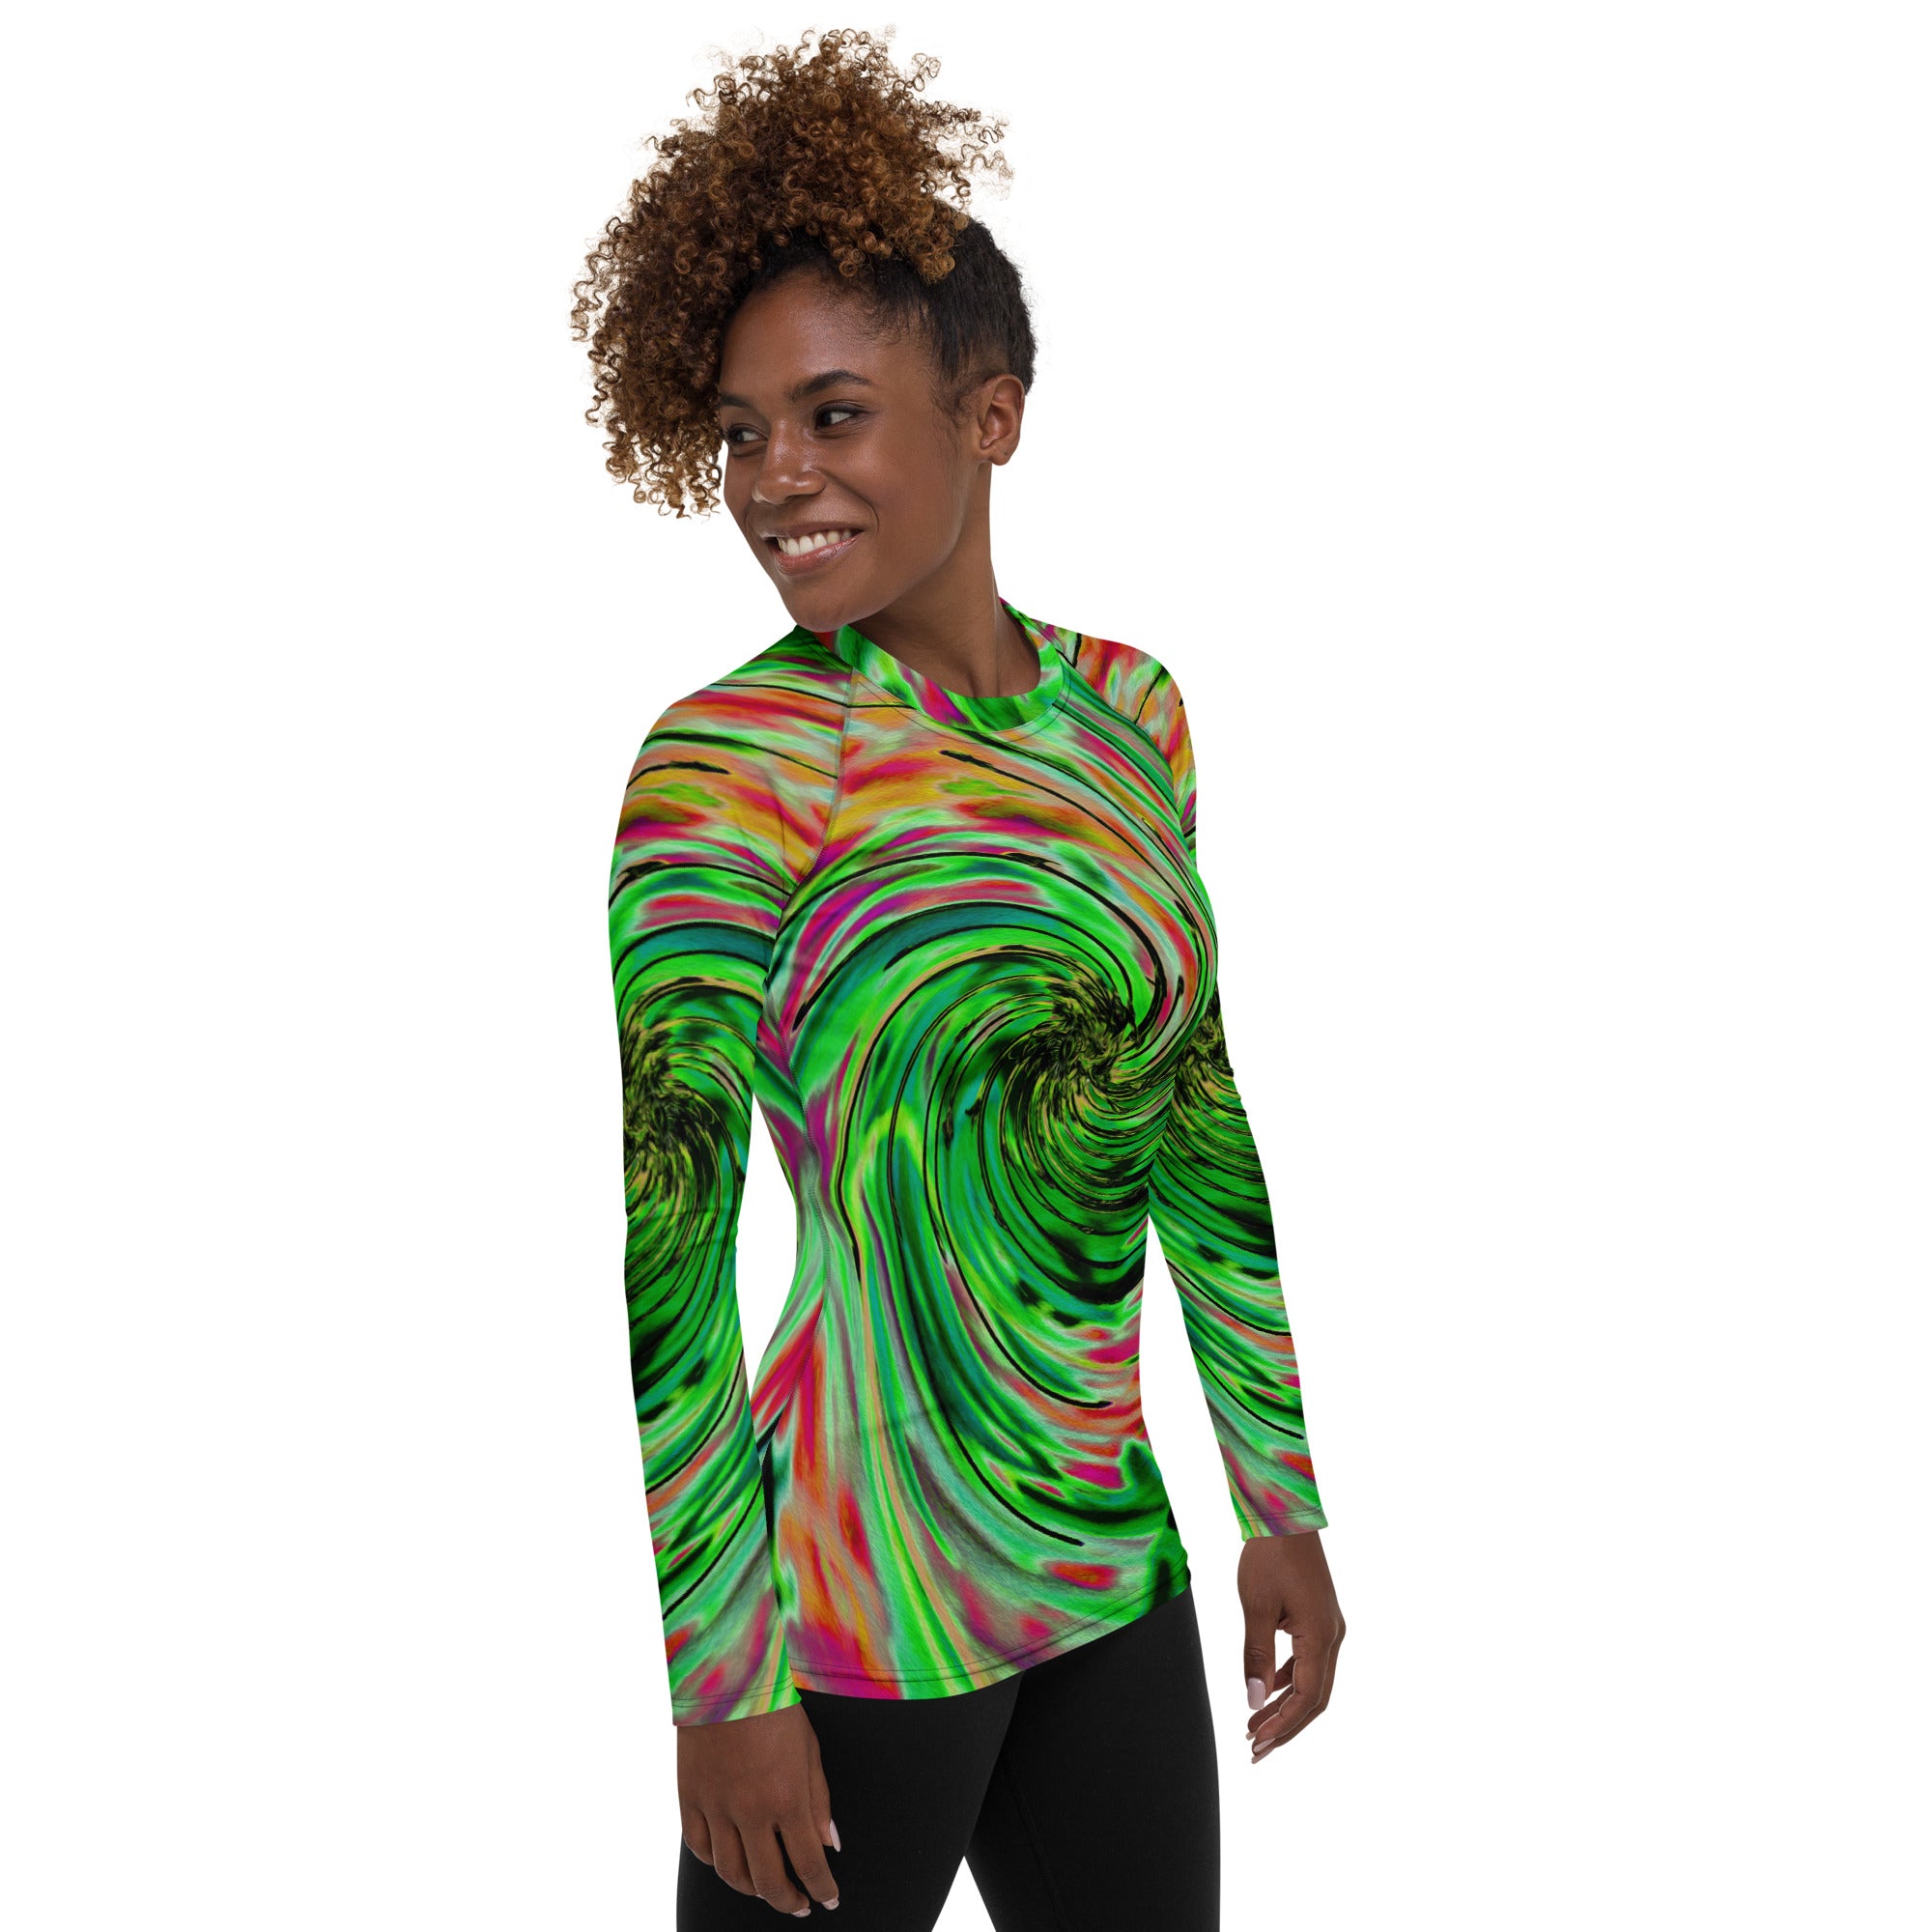 Women's Rash Guard Shirts, Cool Abstract Lime Green and Black Floral Swirl